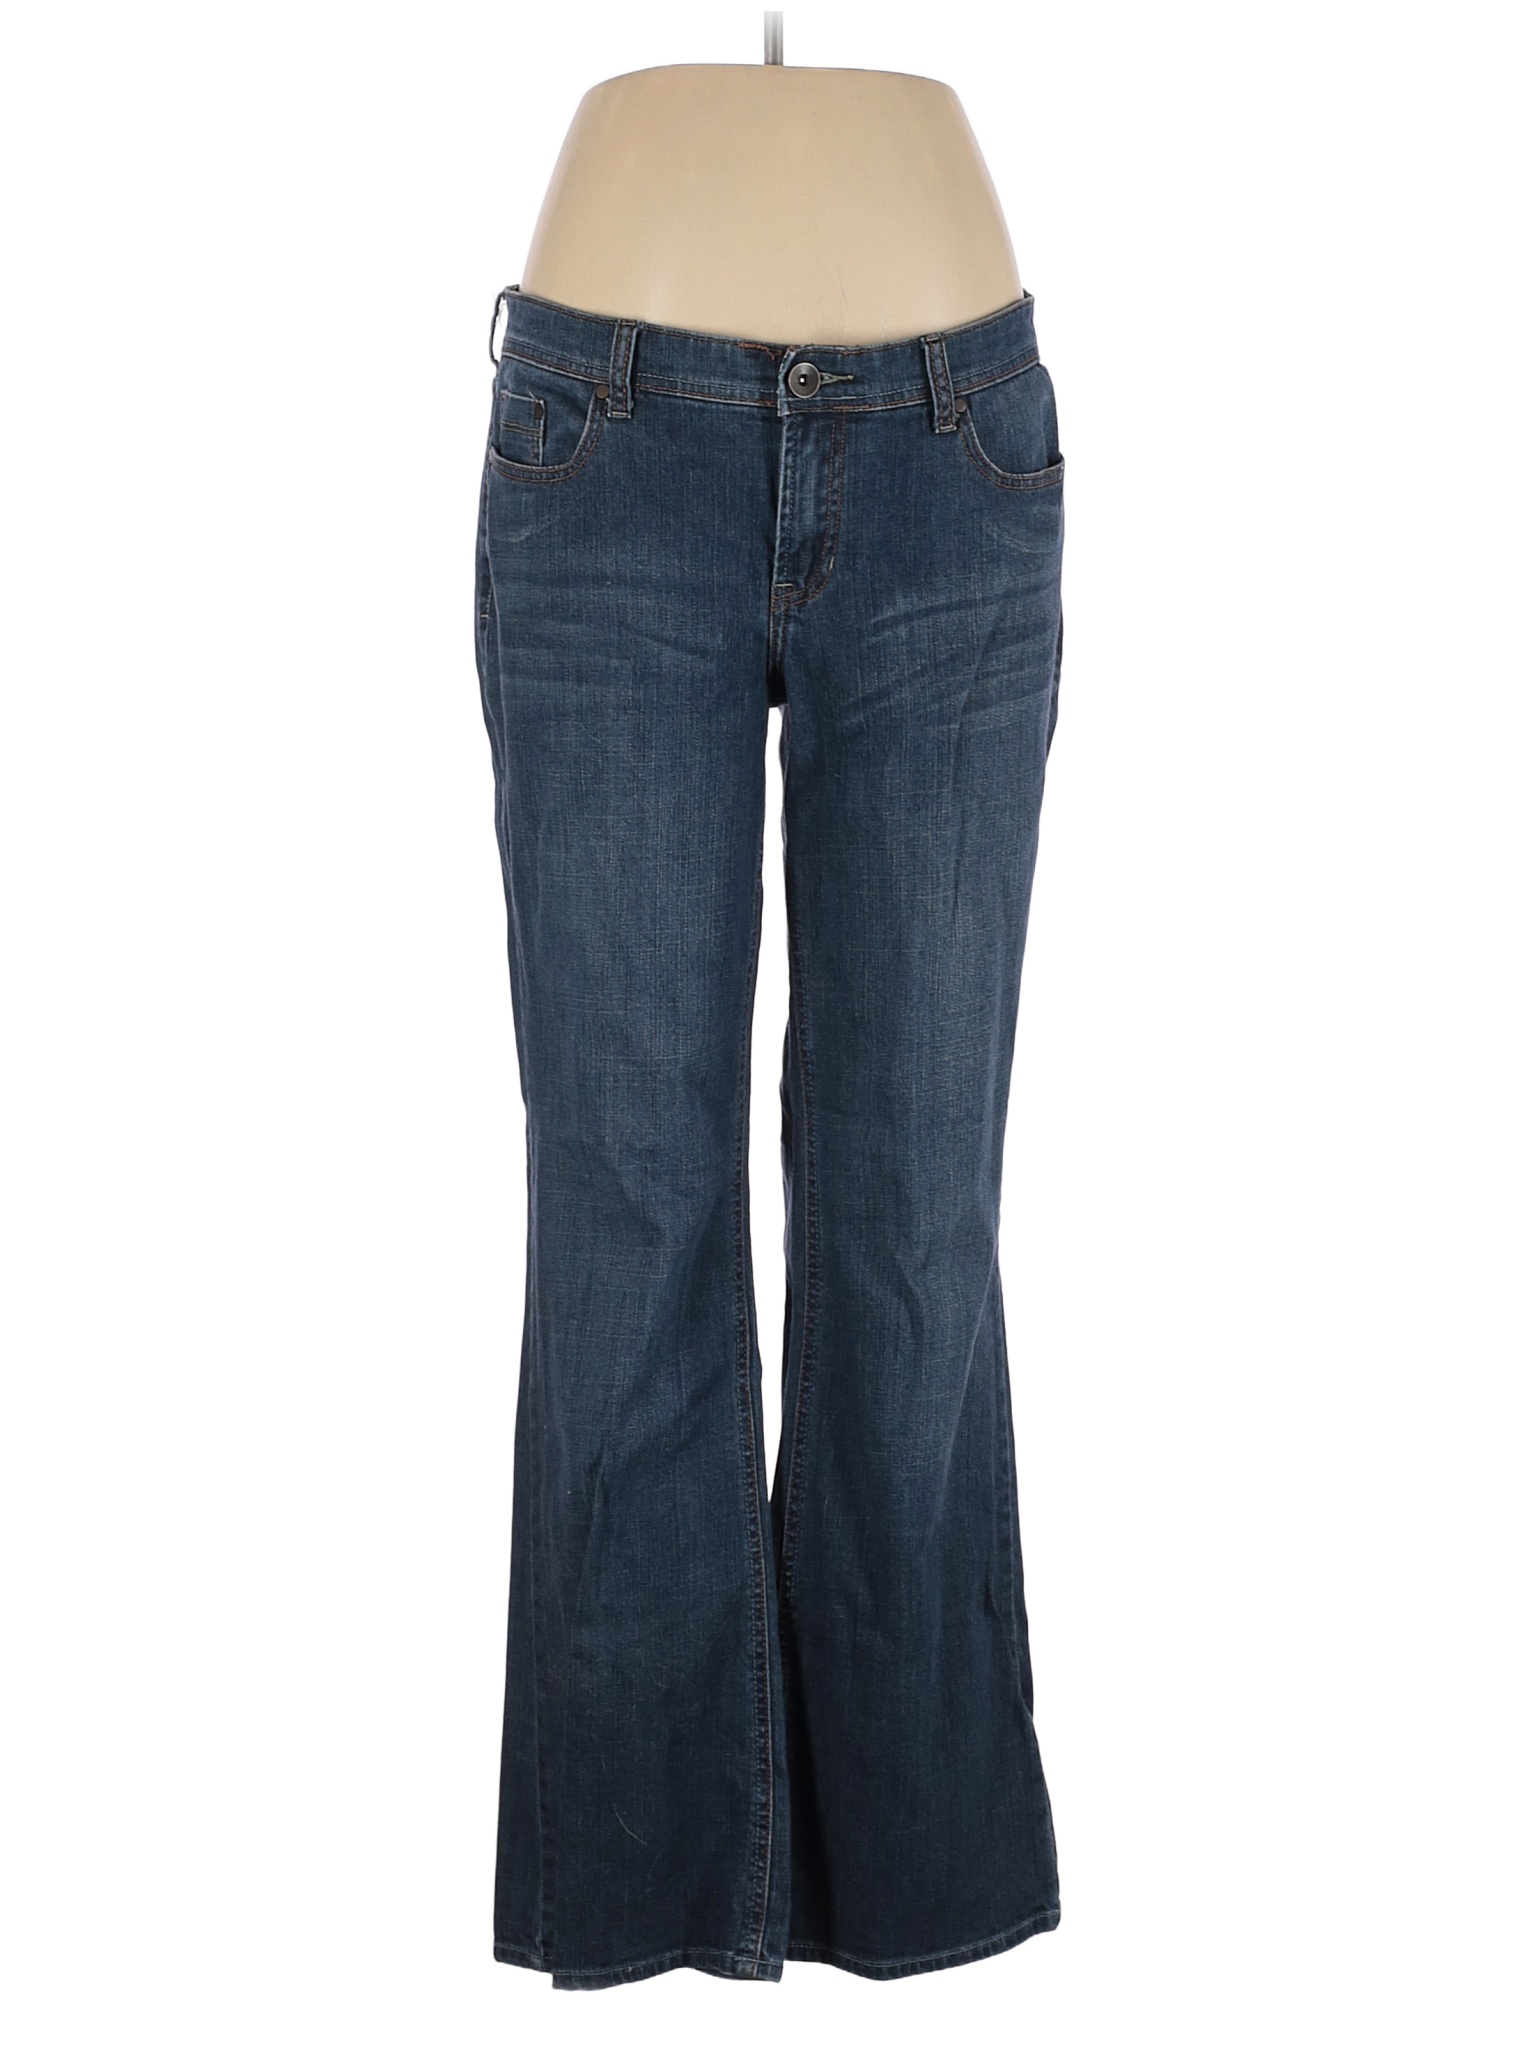 a.n.a. A New Approach Solid Blue Jeans Size 12 - 58% off | thredUP